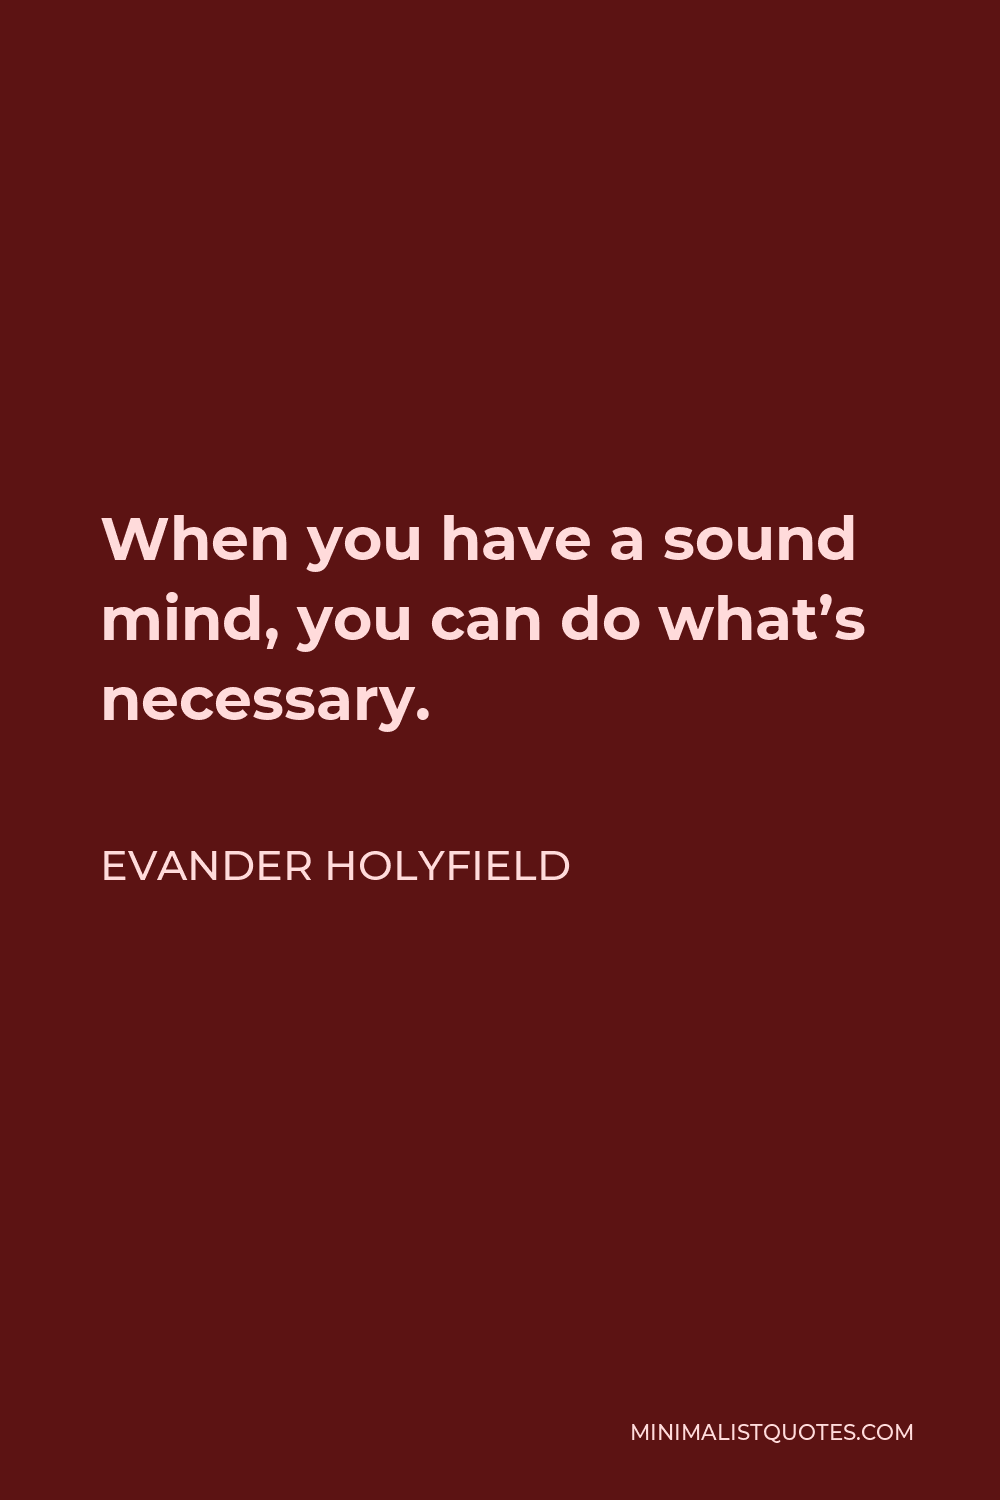 Evander Holyfield Quote - When you have a sound mind, you can do what’s necessary.